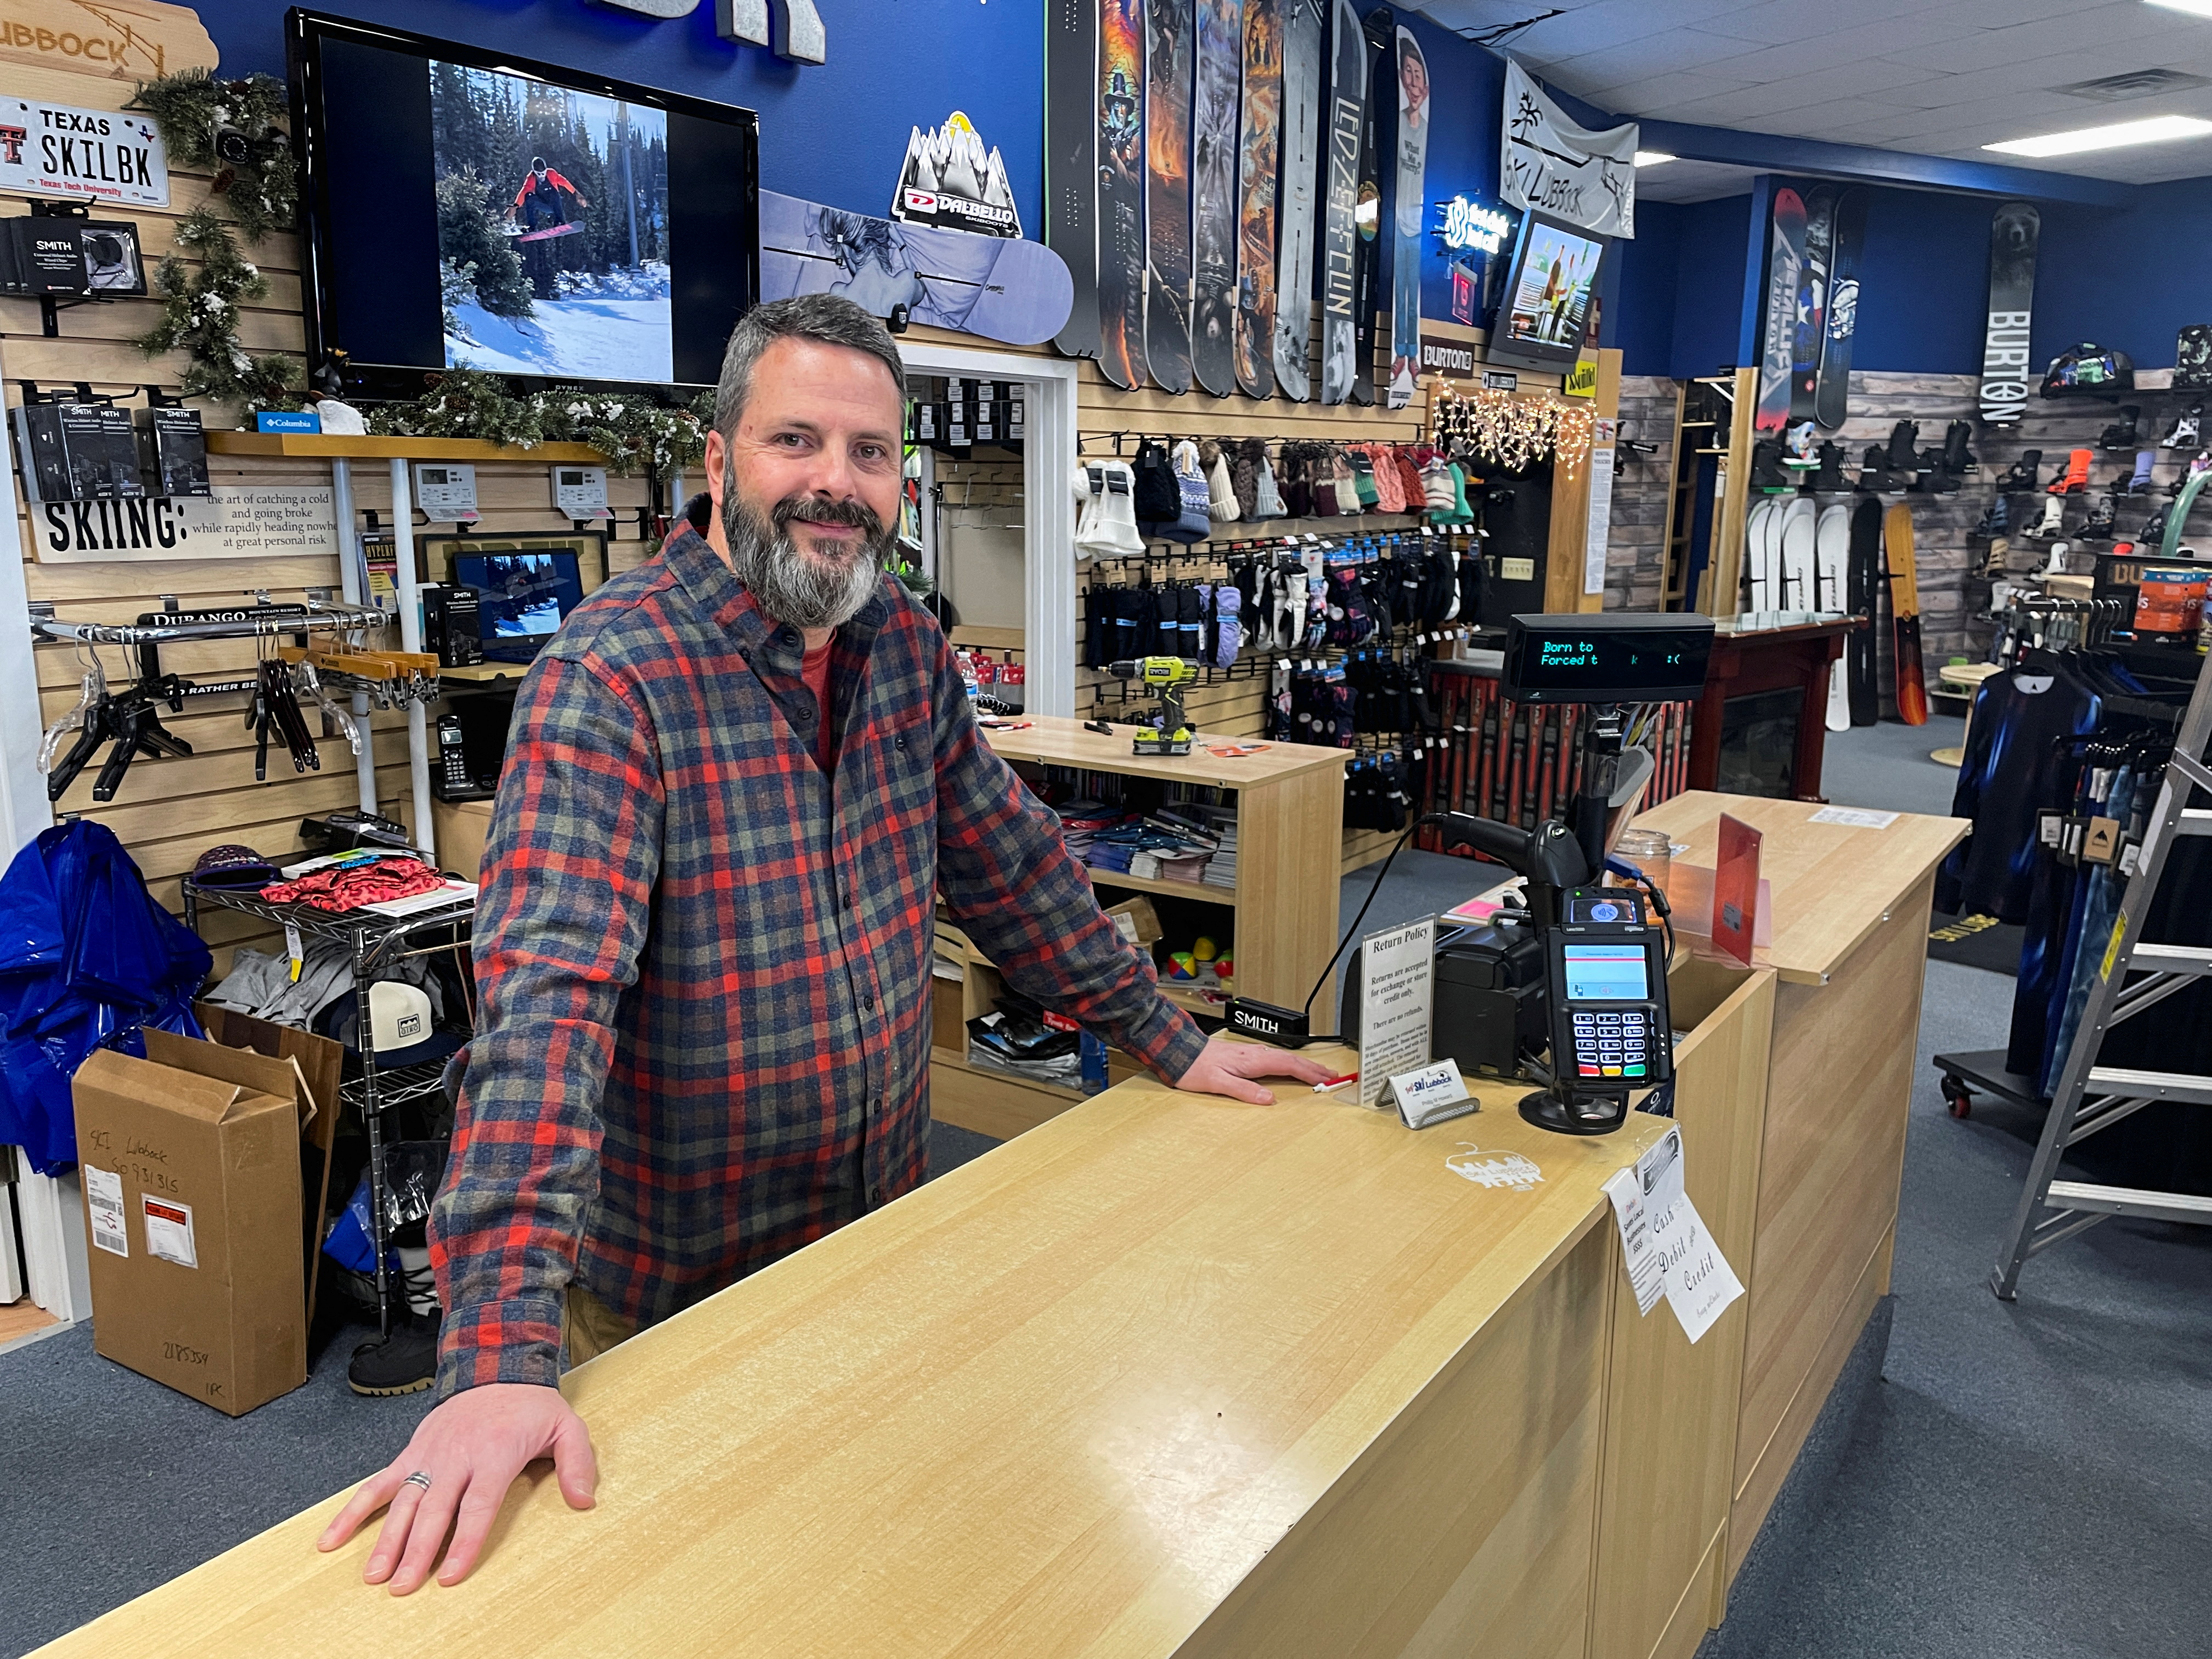 Phillip Howard poses for a photo inside his Troy's Ski Lubbock shop, in Lubbock, Texas, January 14, 2022. Picture taken January 14, 2022. Howard says supply chain woes are making life extremely difficult for small business owners like himself. REUTERS/Brad Brooks